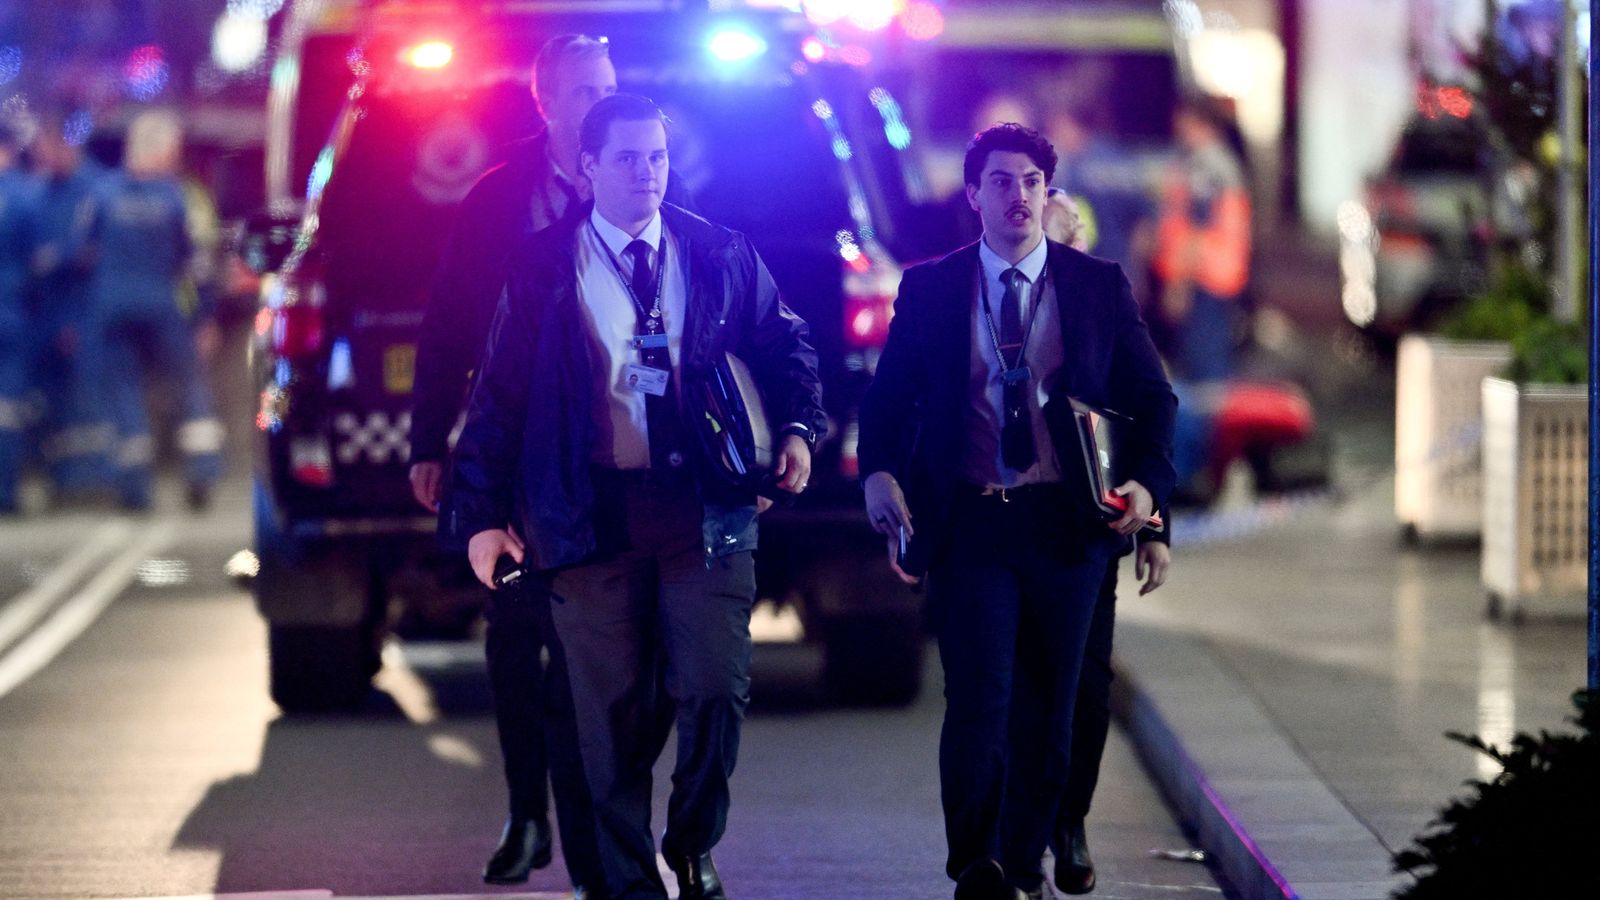 police identify sydney attacker who killed six people